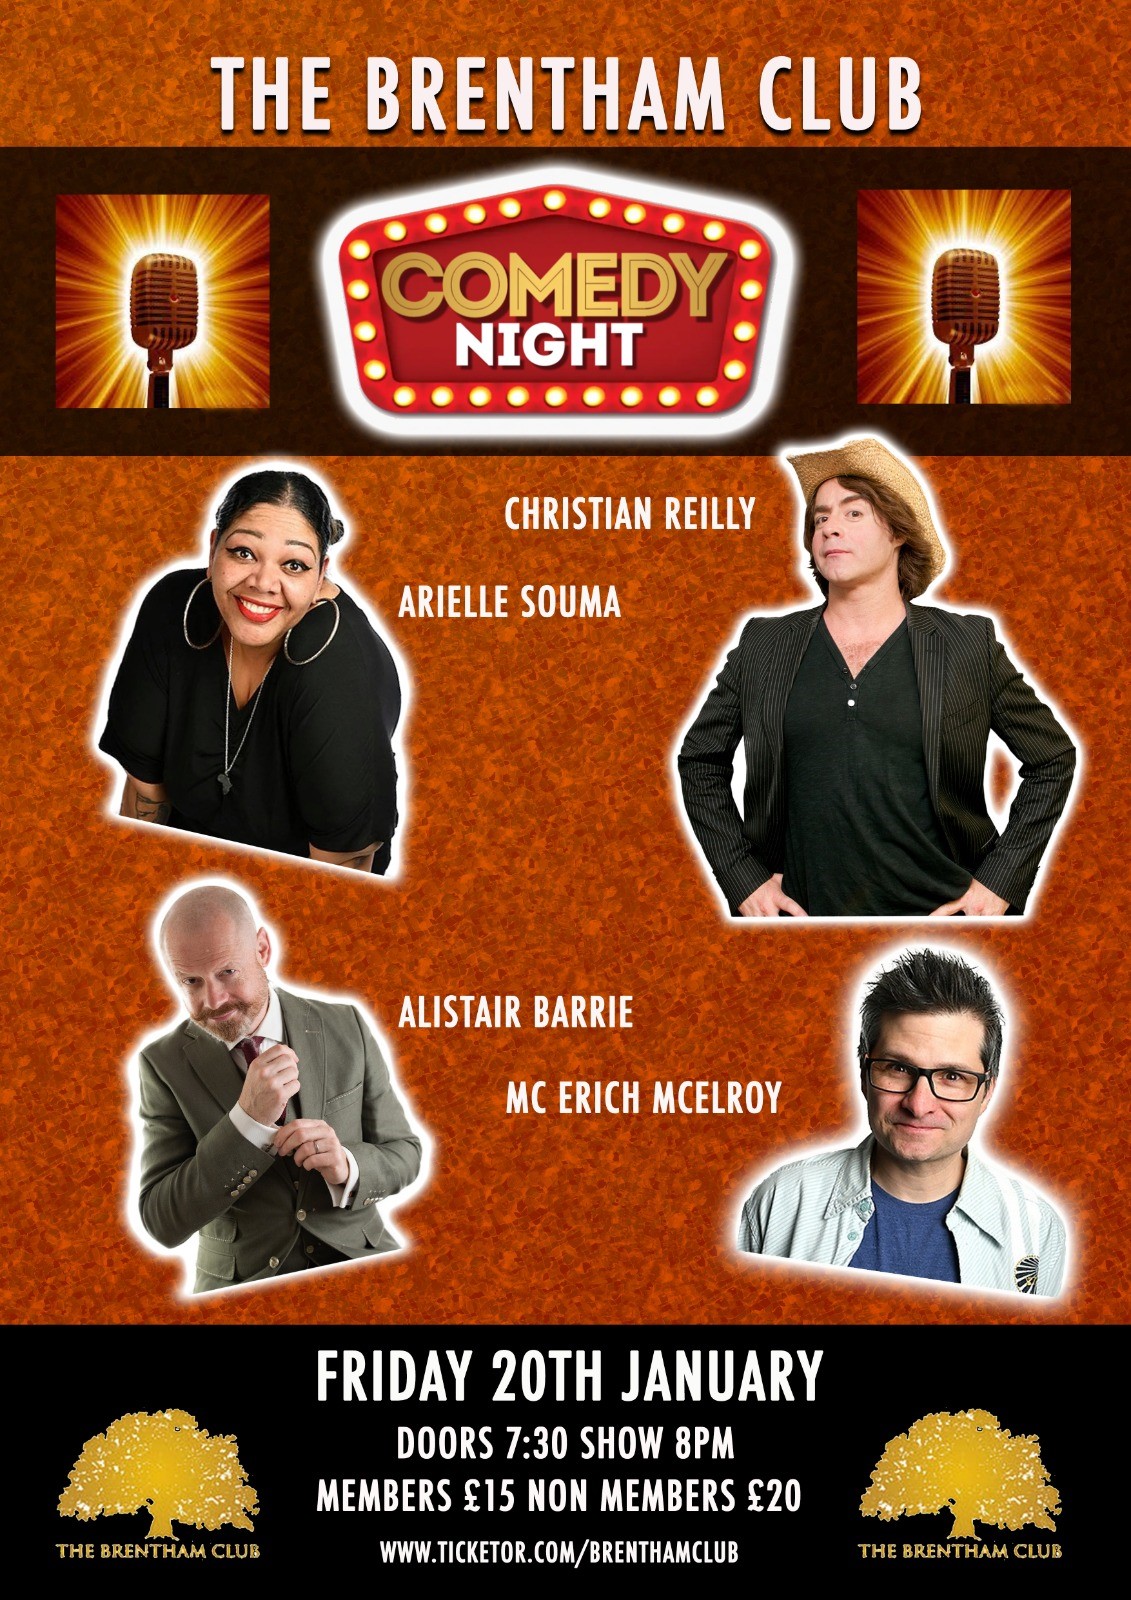 Comedy Night - show starts 8pm Christian Reilly, Alistair Barrie, Erich McElroy and Arielle Souma on ene. 20, 20:00@The Brentham Club - Buy tickets and Get information on Brenthamclub.co.uk 